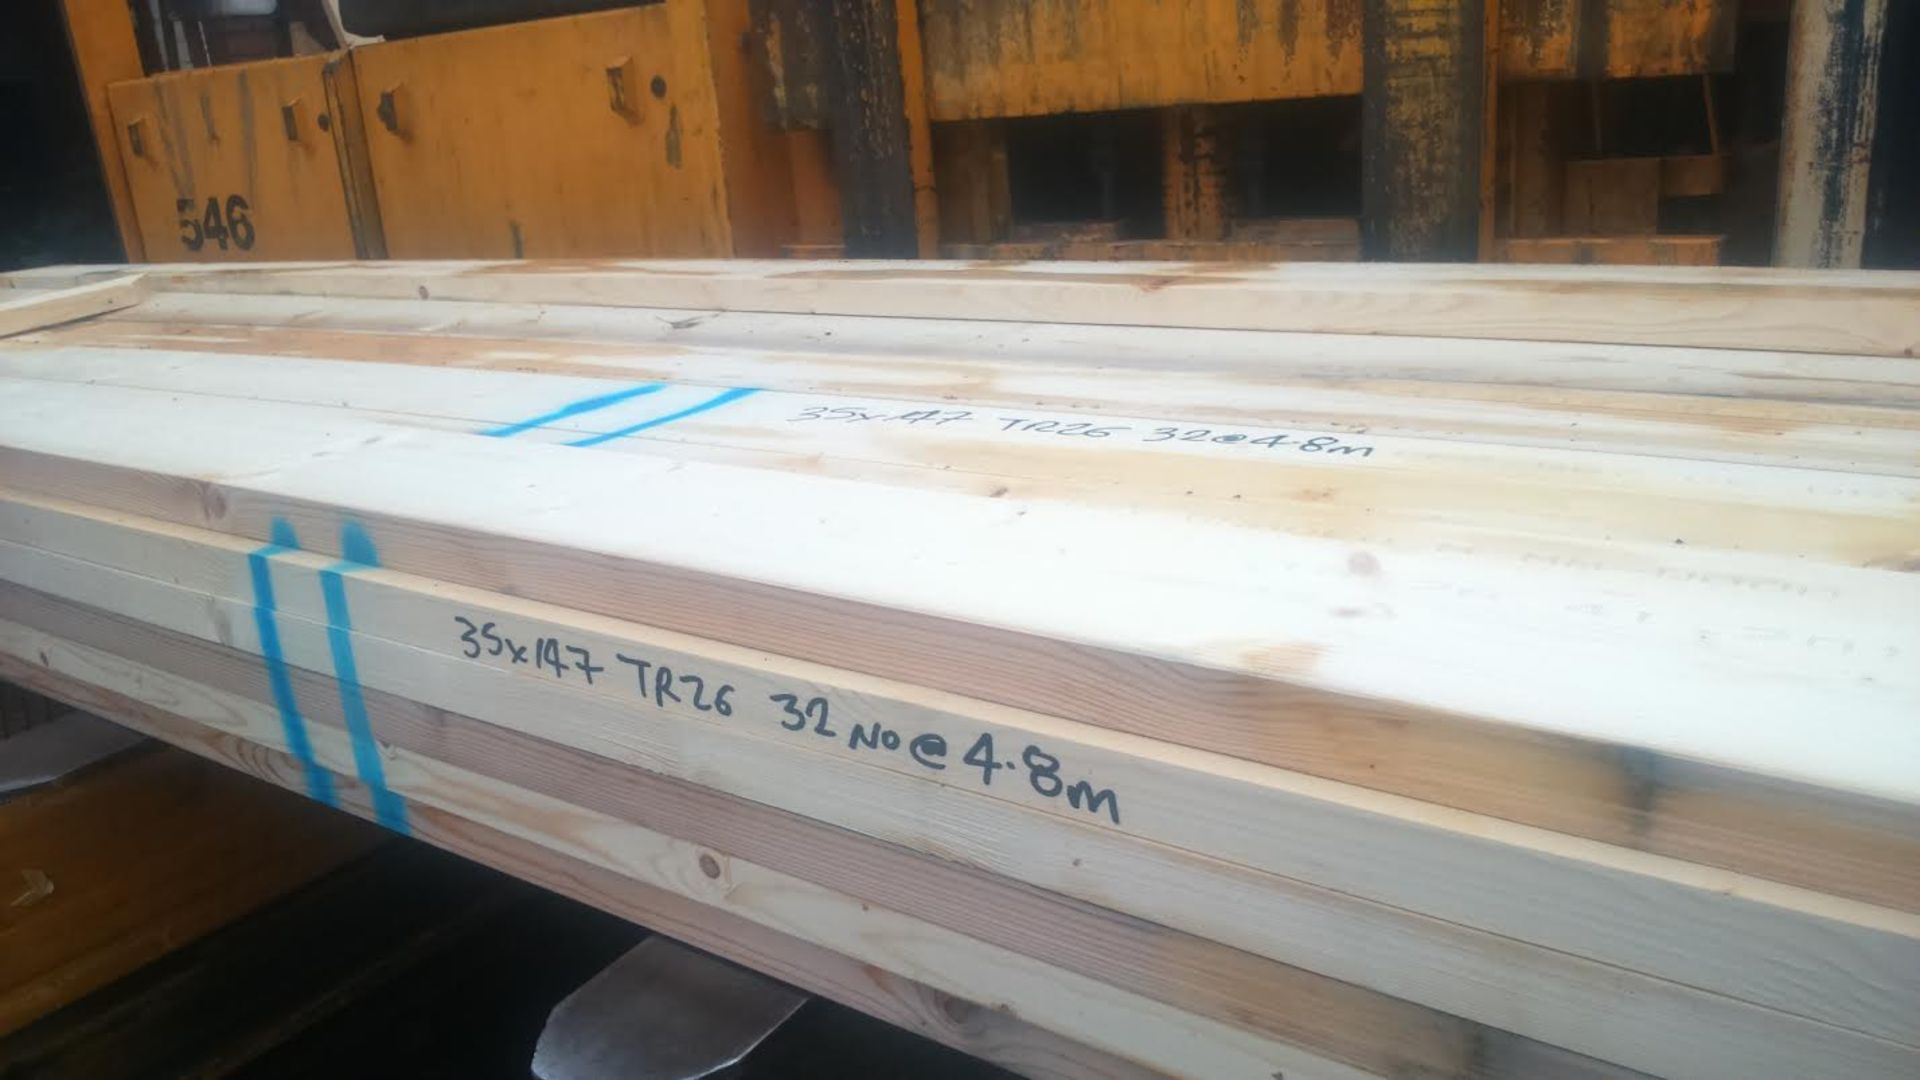 32 x Pieces of Unused TR26 Grade Timber - Size: 35 x 147 x 4.8m - Ref Lot 11 - CL151 - Location: - Image 2 of 2